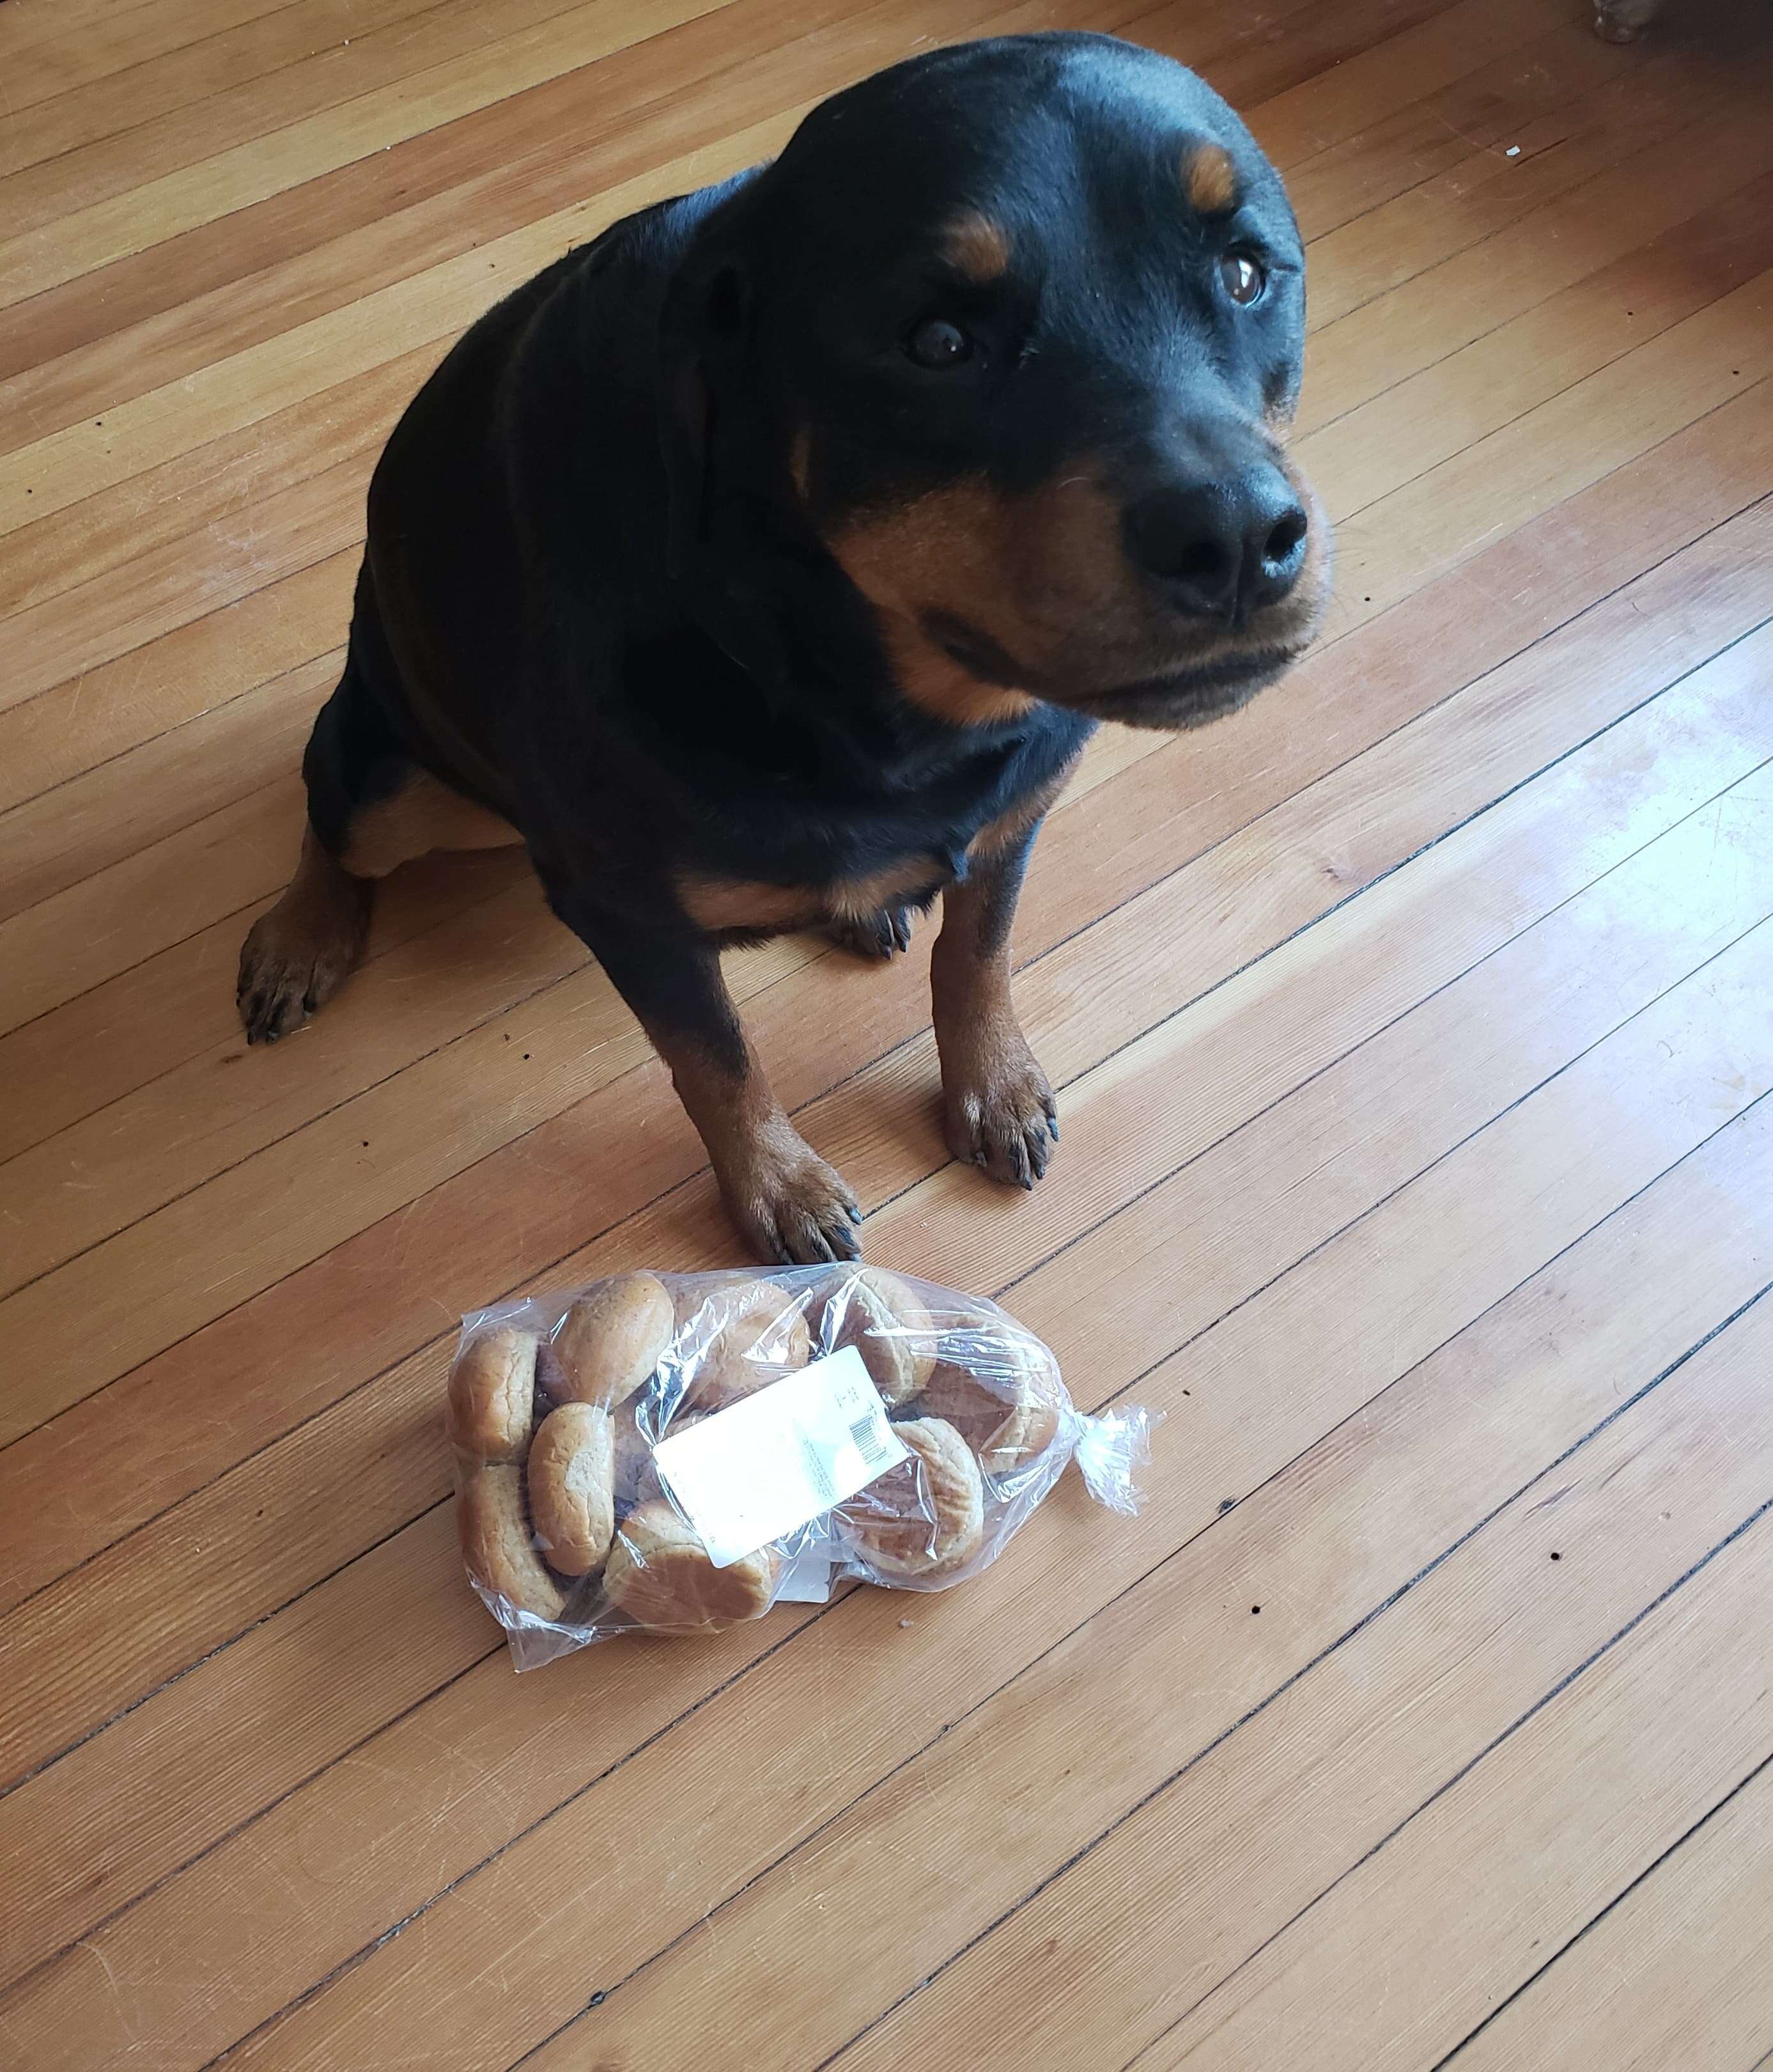 Rottweiler protects bread while mom's away